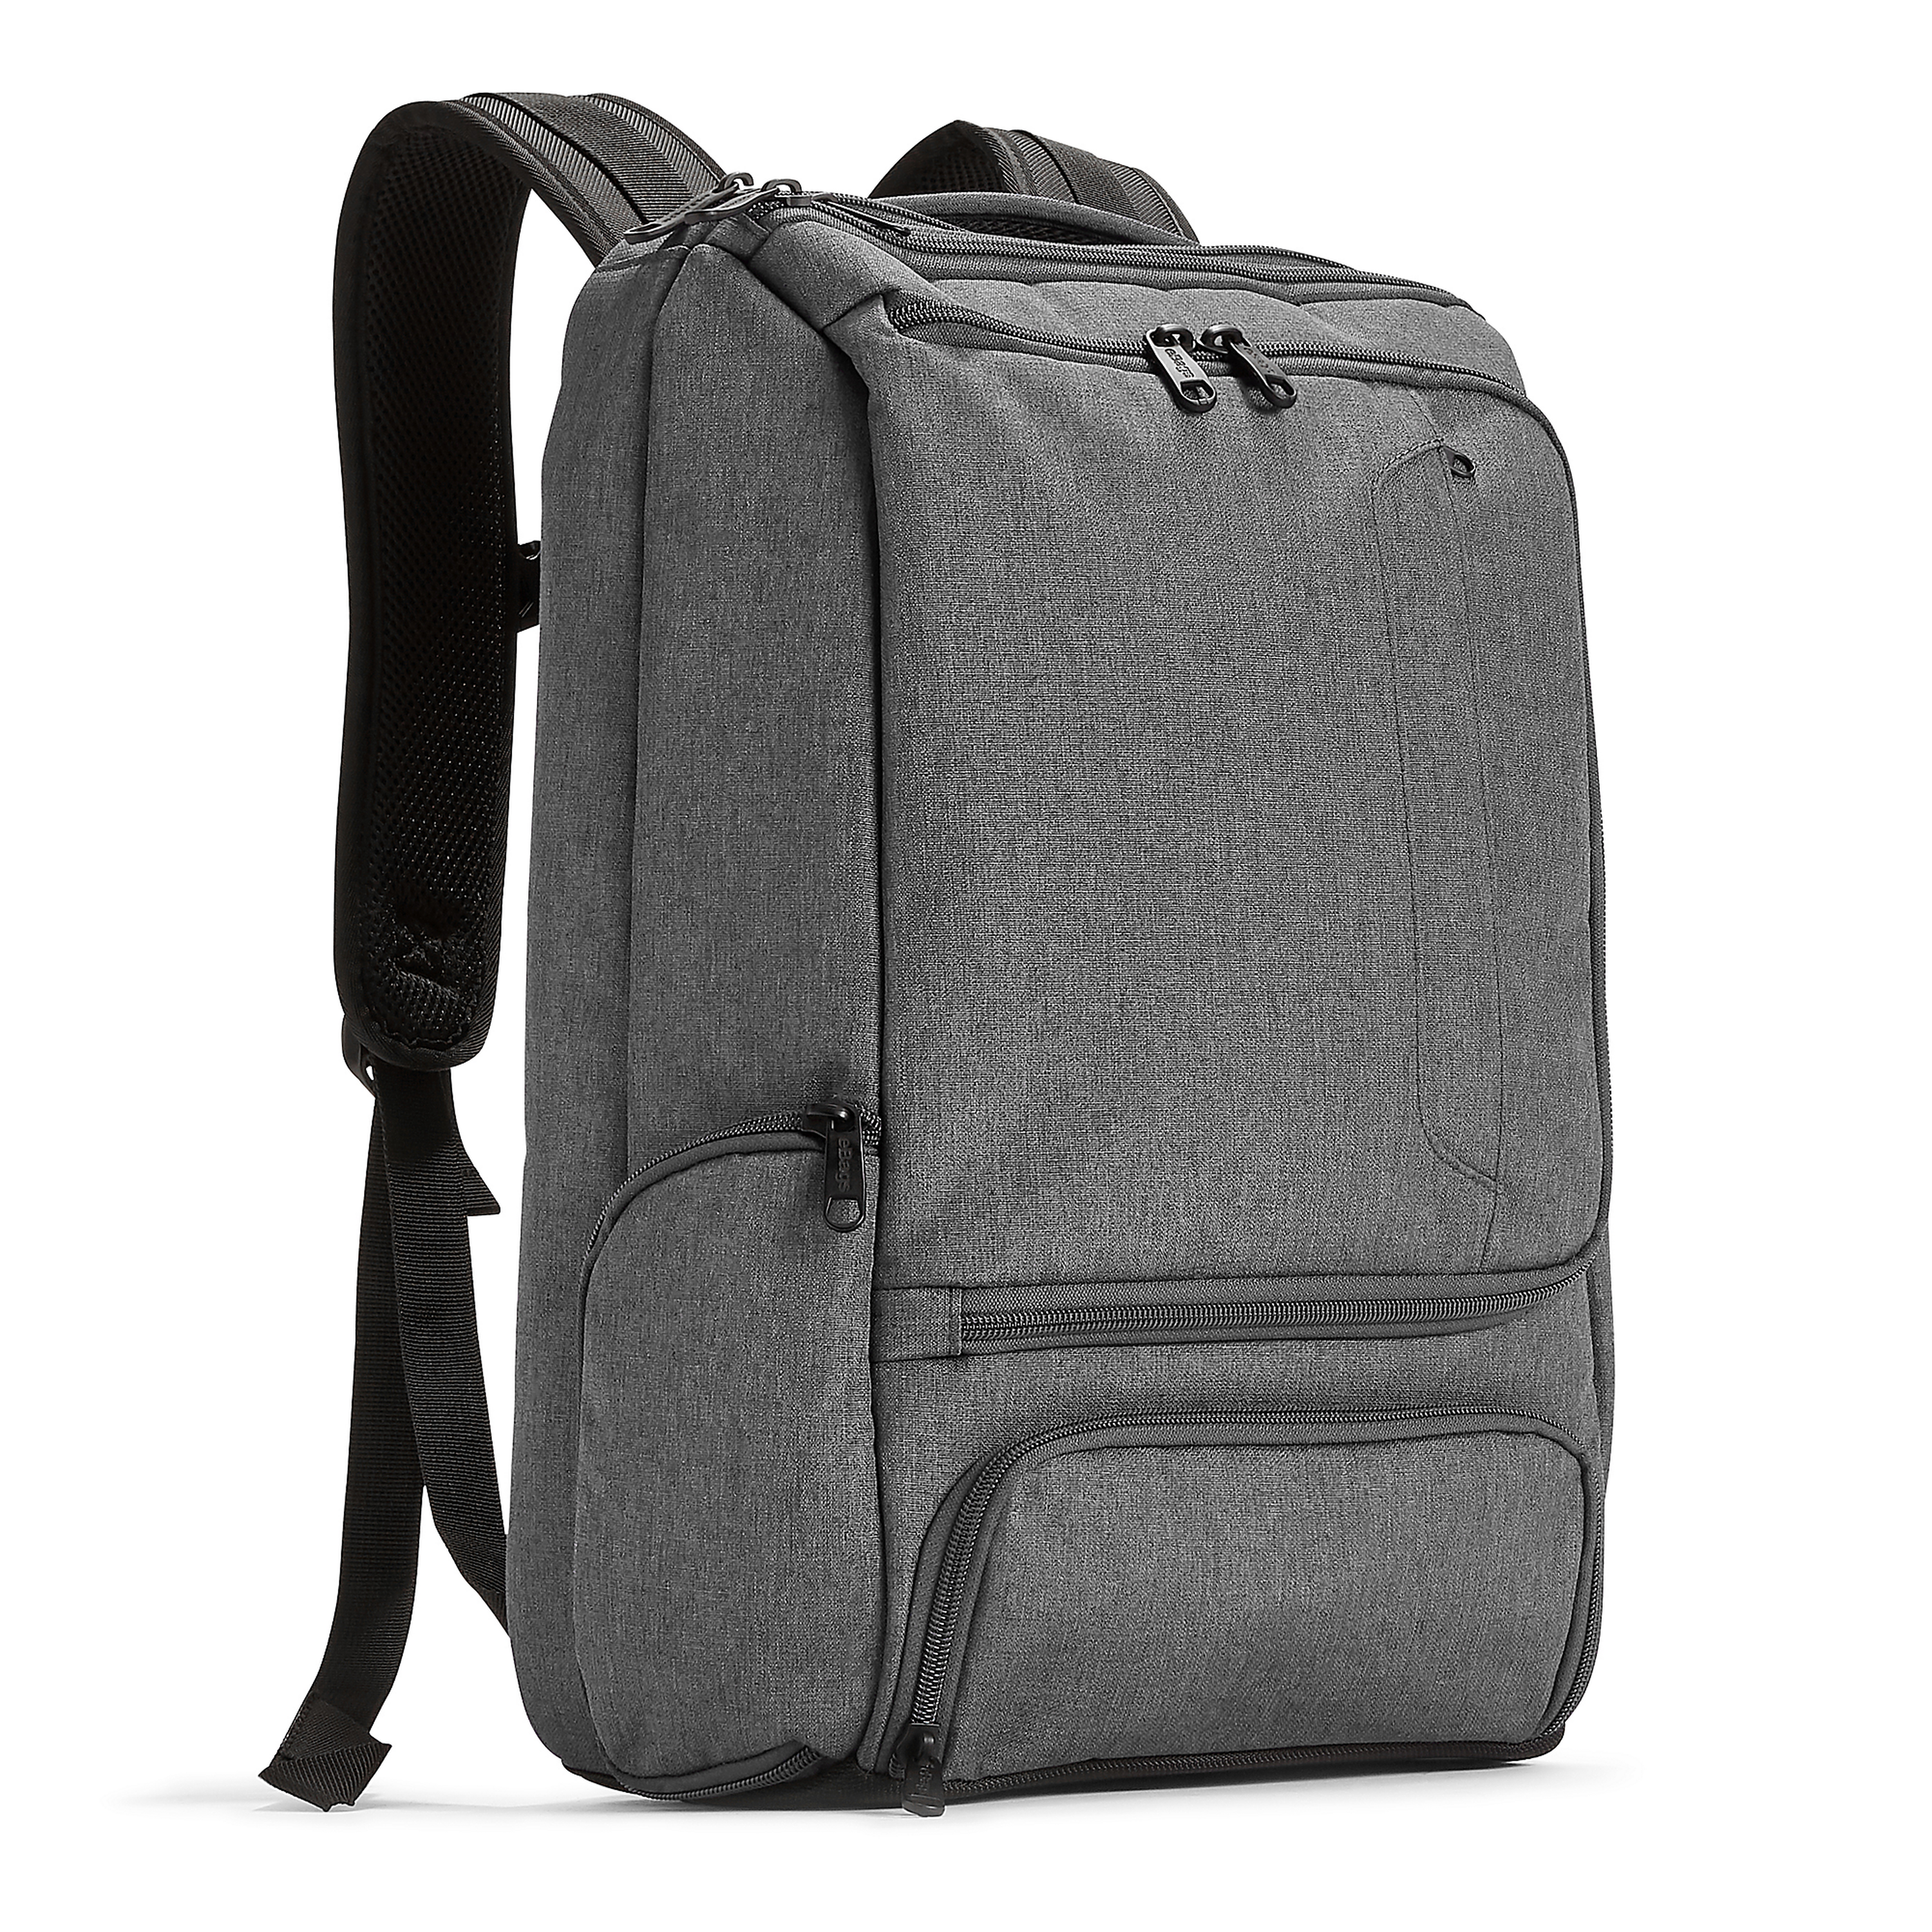 Laundry Backpack, Cool Grey, Sold by at Home